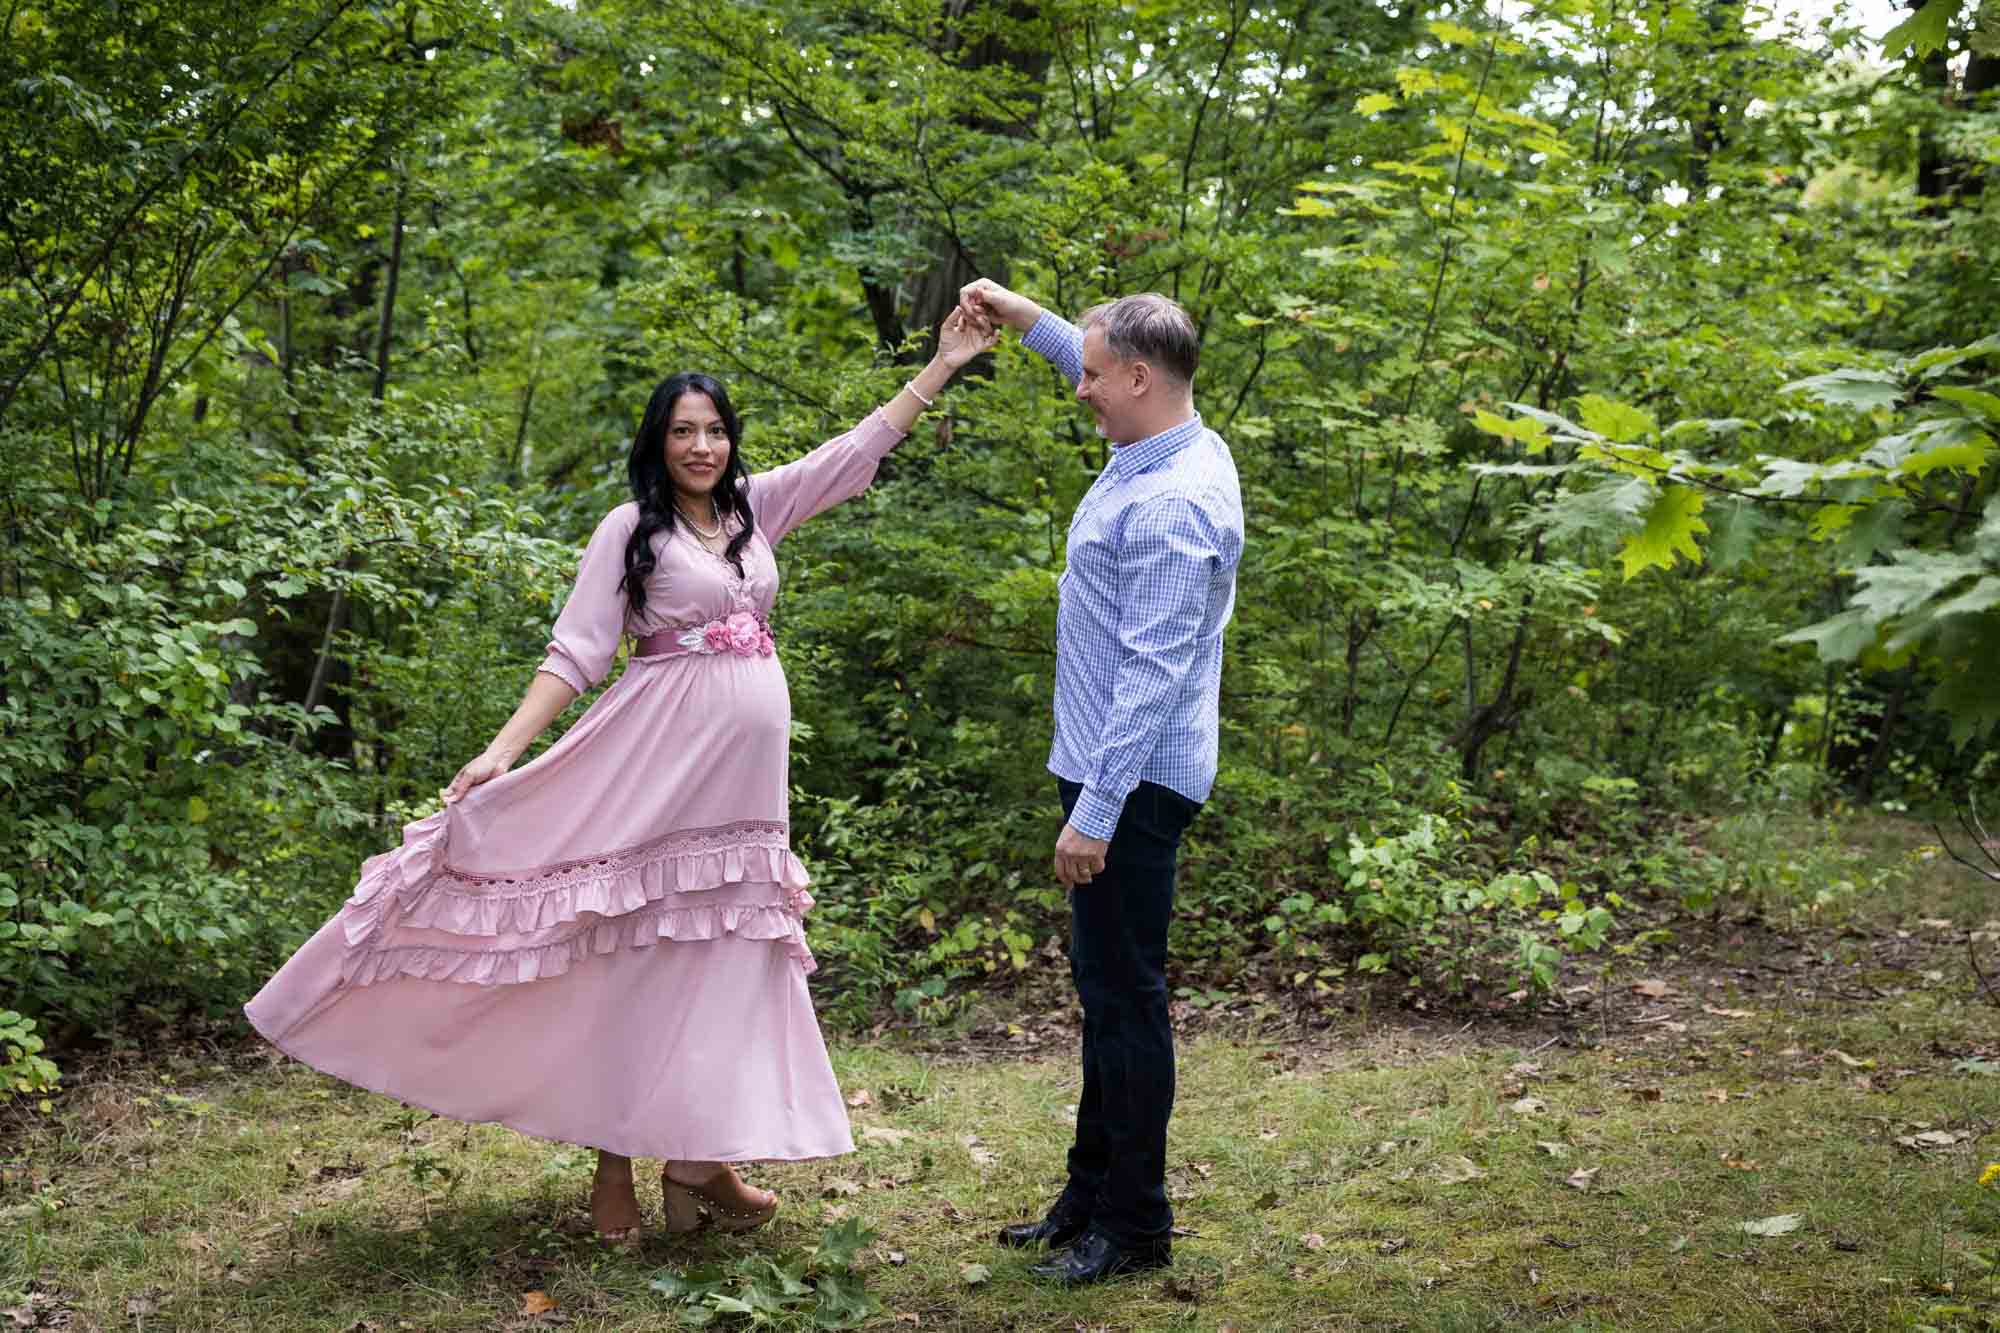 Forest Park maternity photos of a couple dancing in a forest